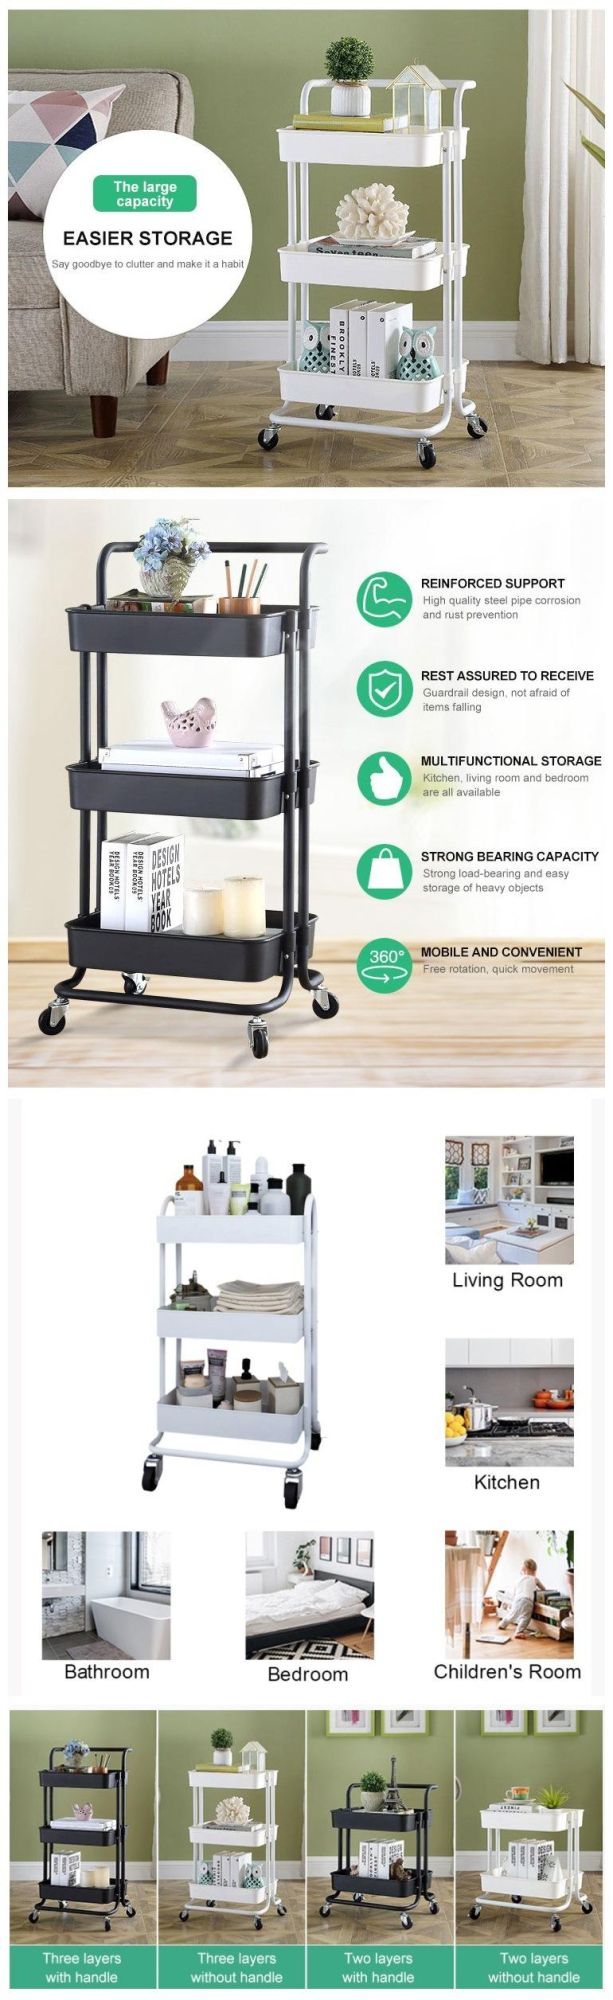 3 Tier Metal Rolling Utility Storage Cart for Kitchen Bedroom Office Organizer